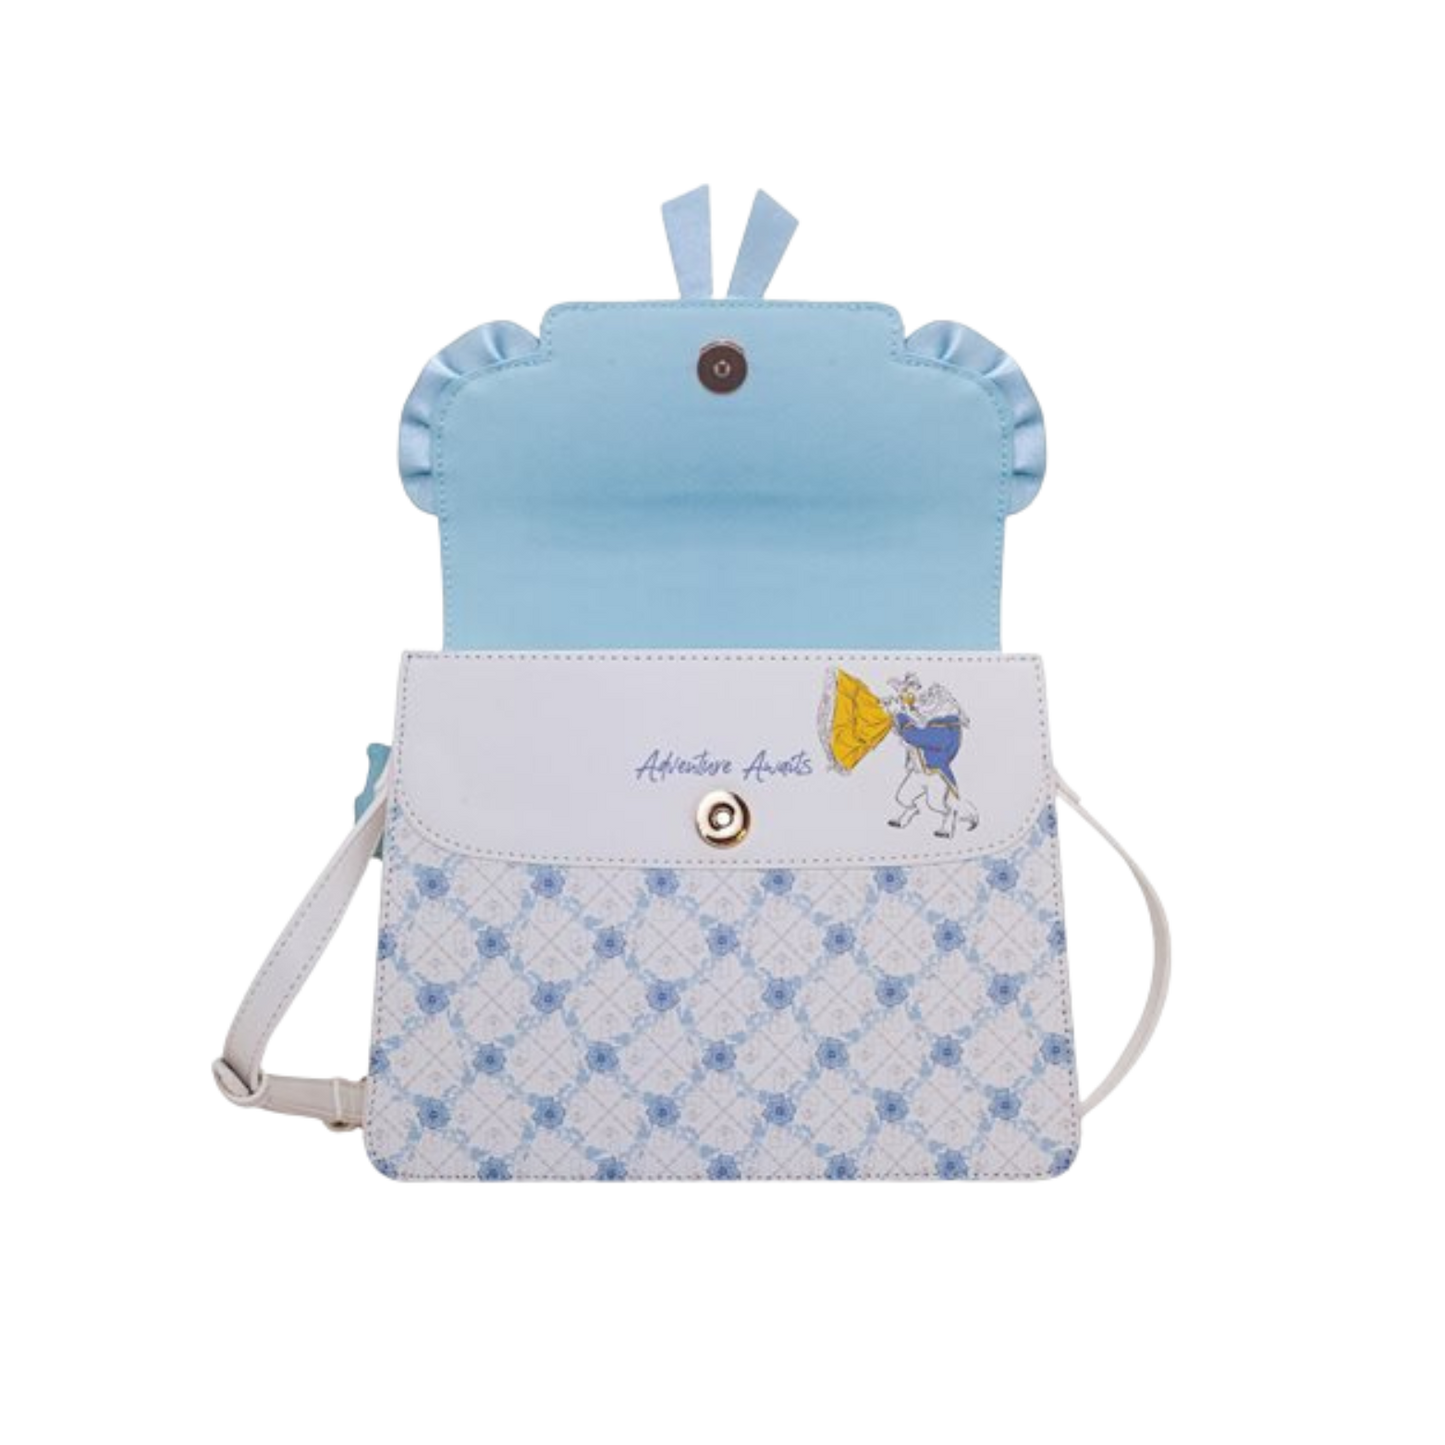 Beauty and the Beast Belle I Want Adventure Satchel